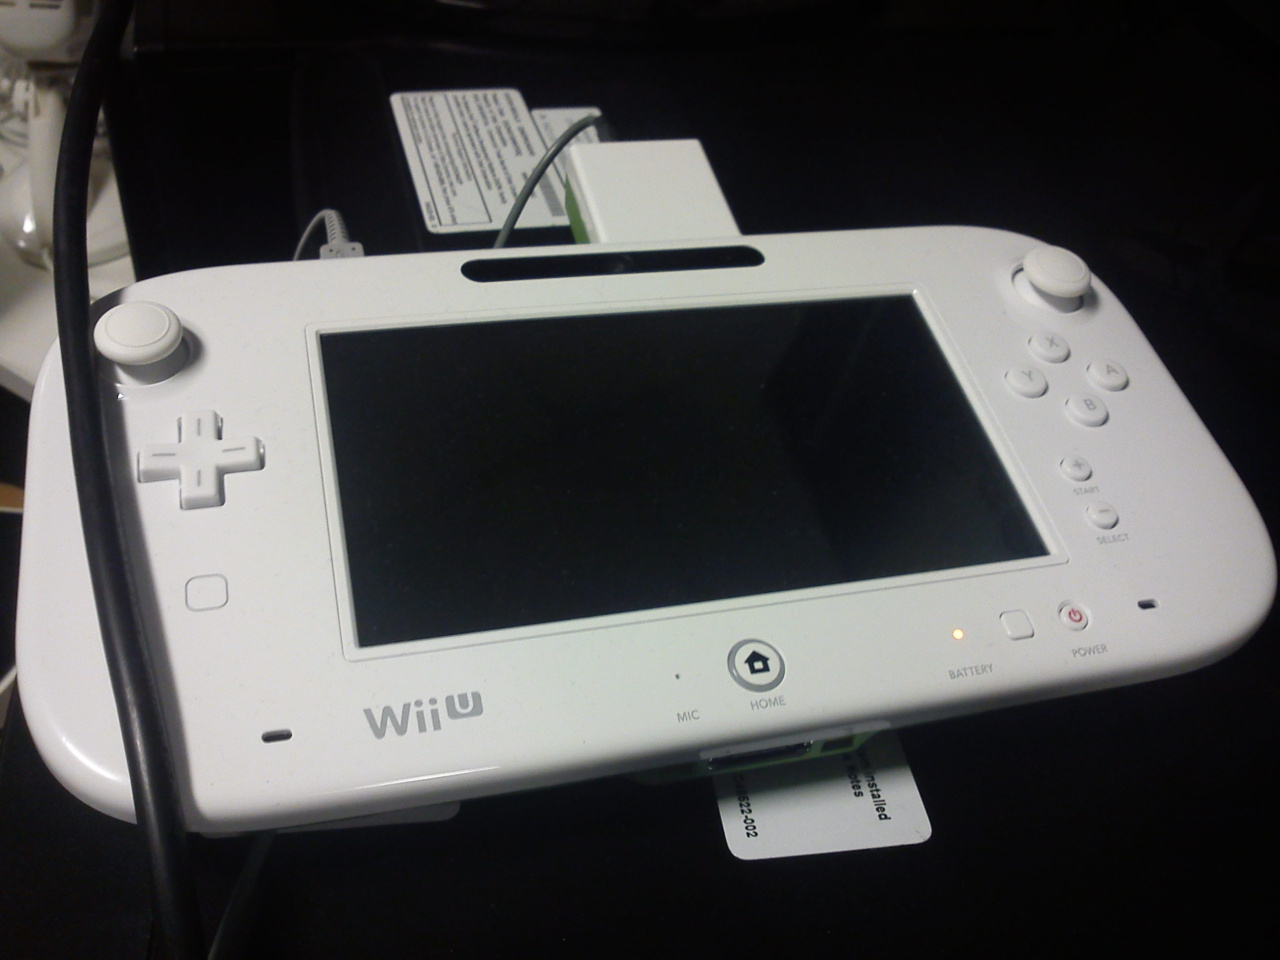 I've compared the prototype E3 gamepad against the retail version. Nintendo  did make some changes after the E3 in 2011 when they exhibited the console.  : r/wiiu